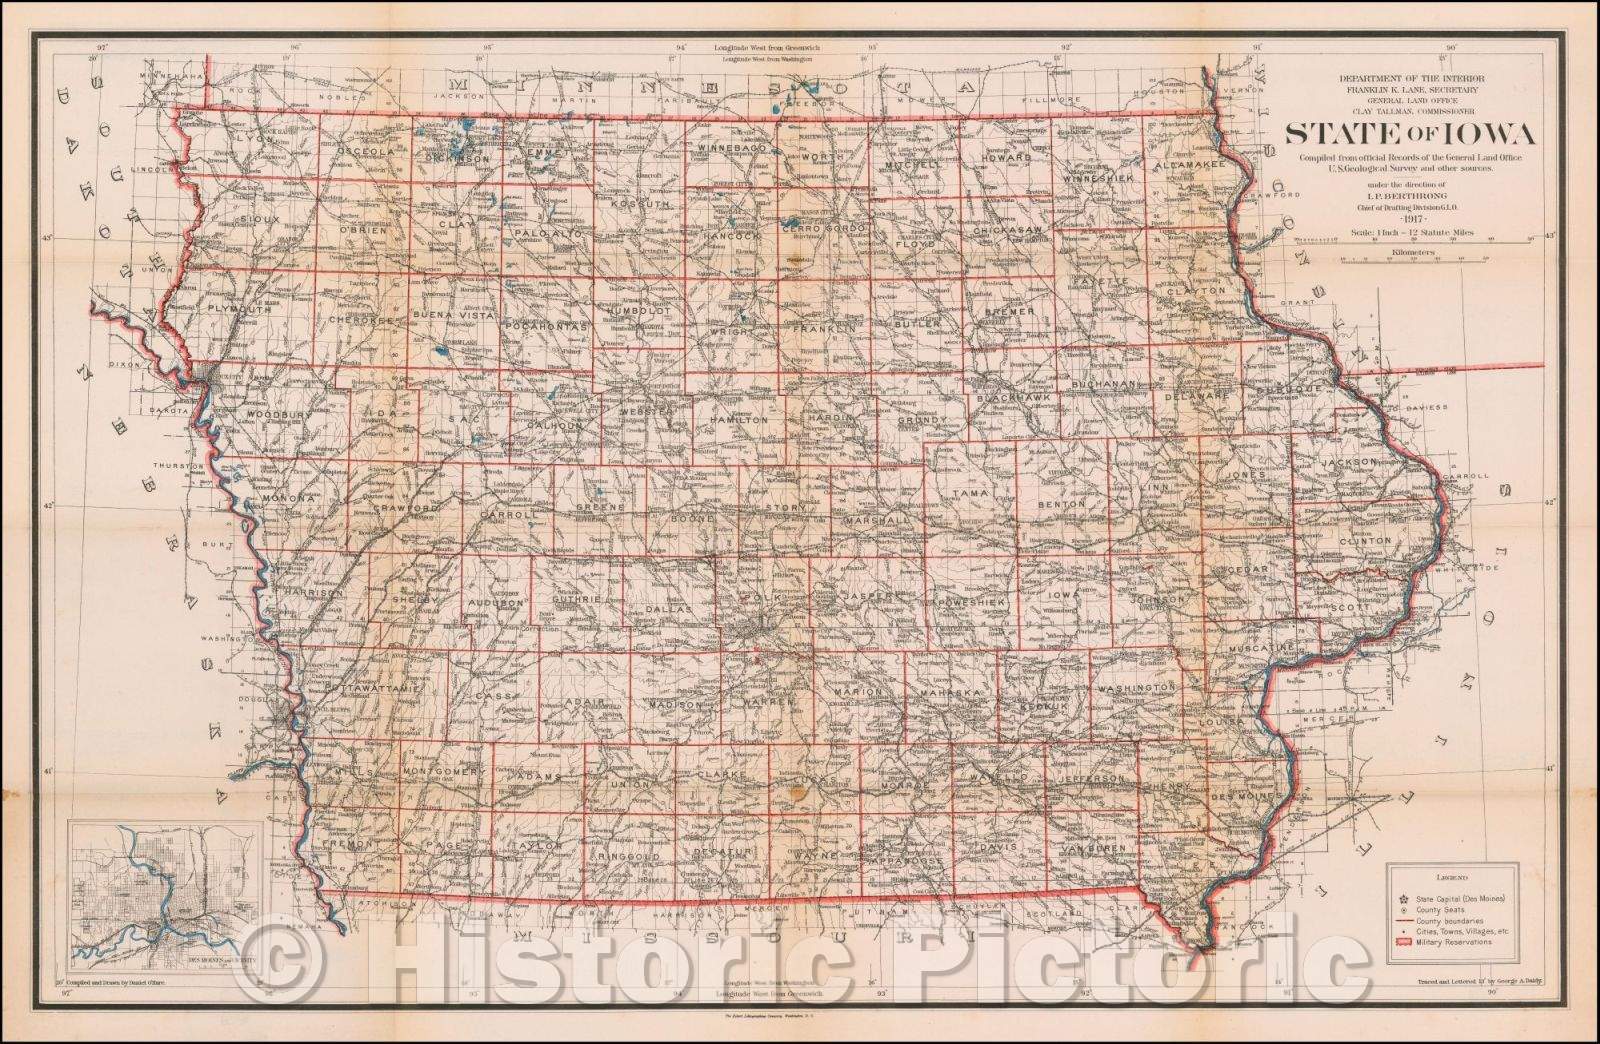 Historic Map - State of Iowa, 1917, U.S. General Land Office - Vintage Wall Art